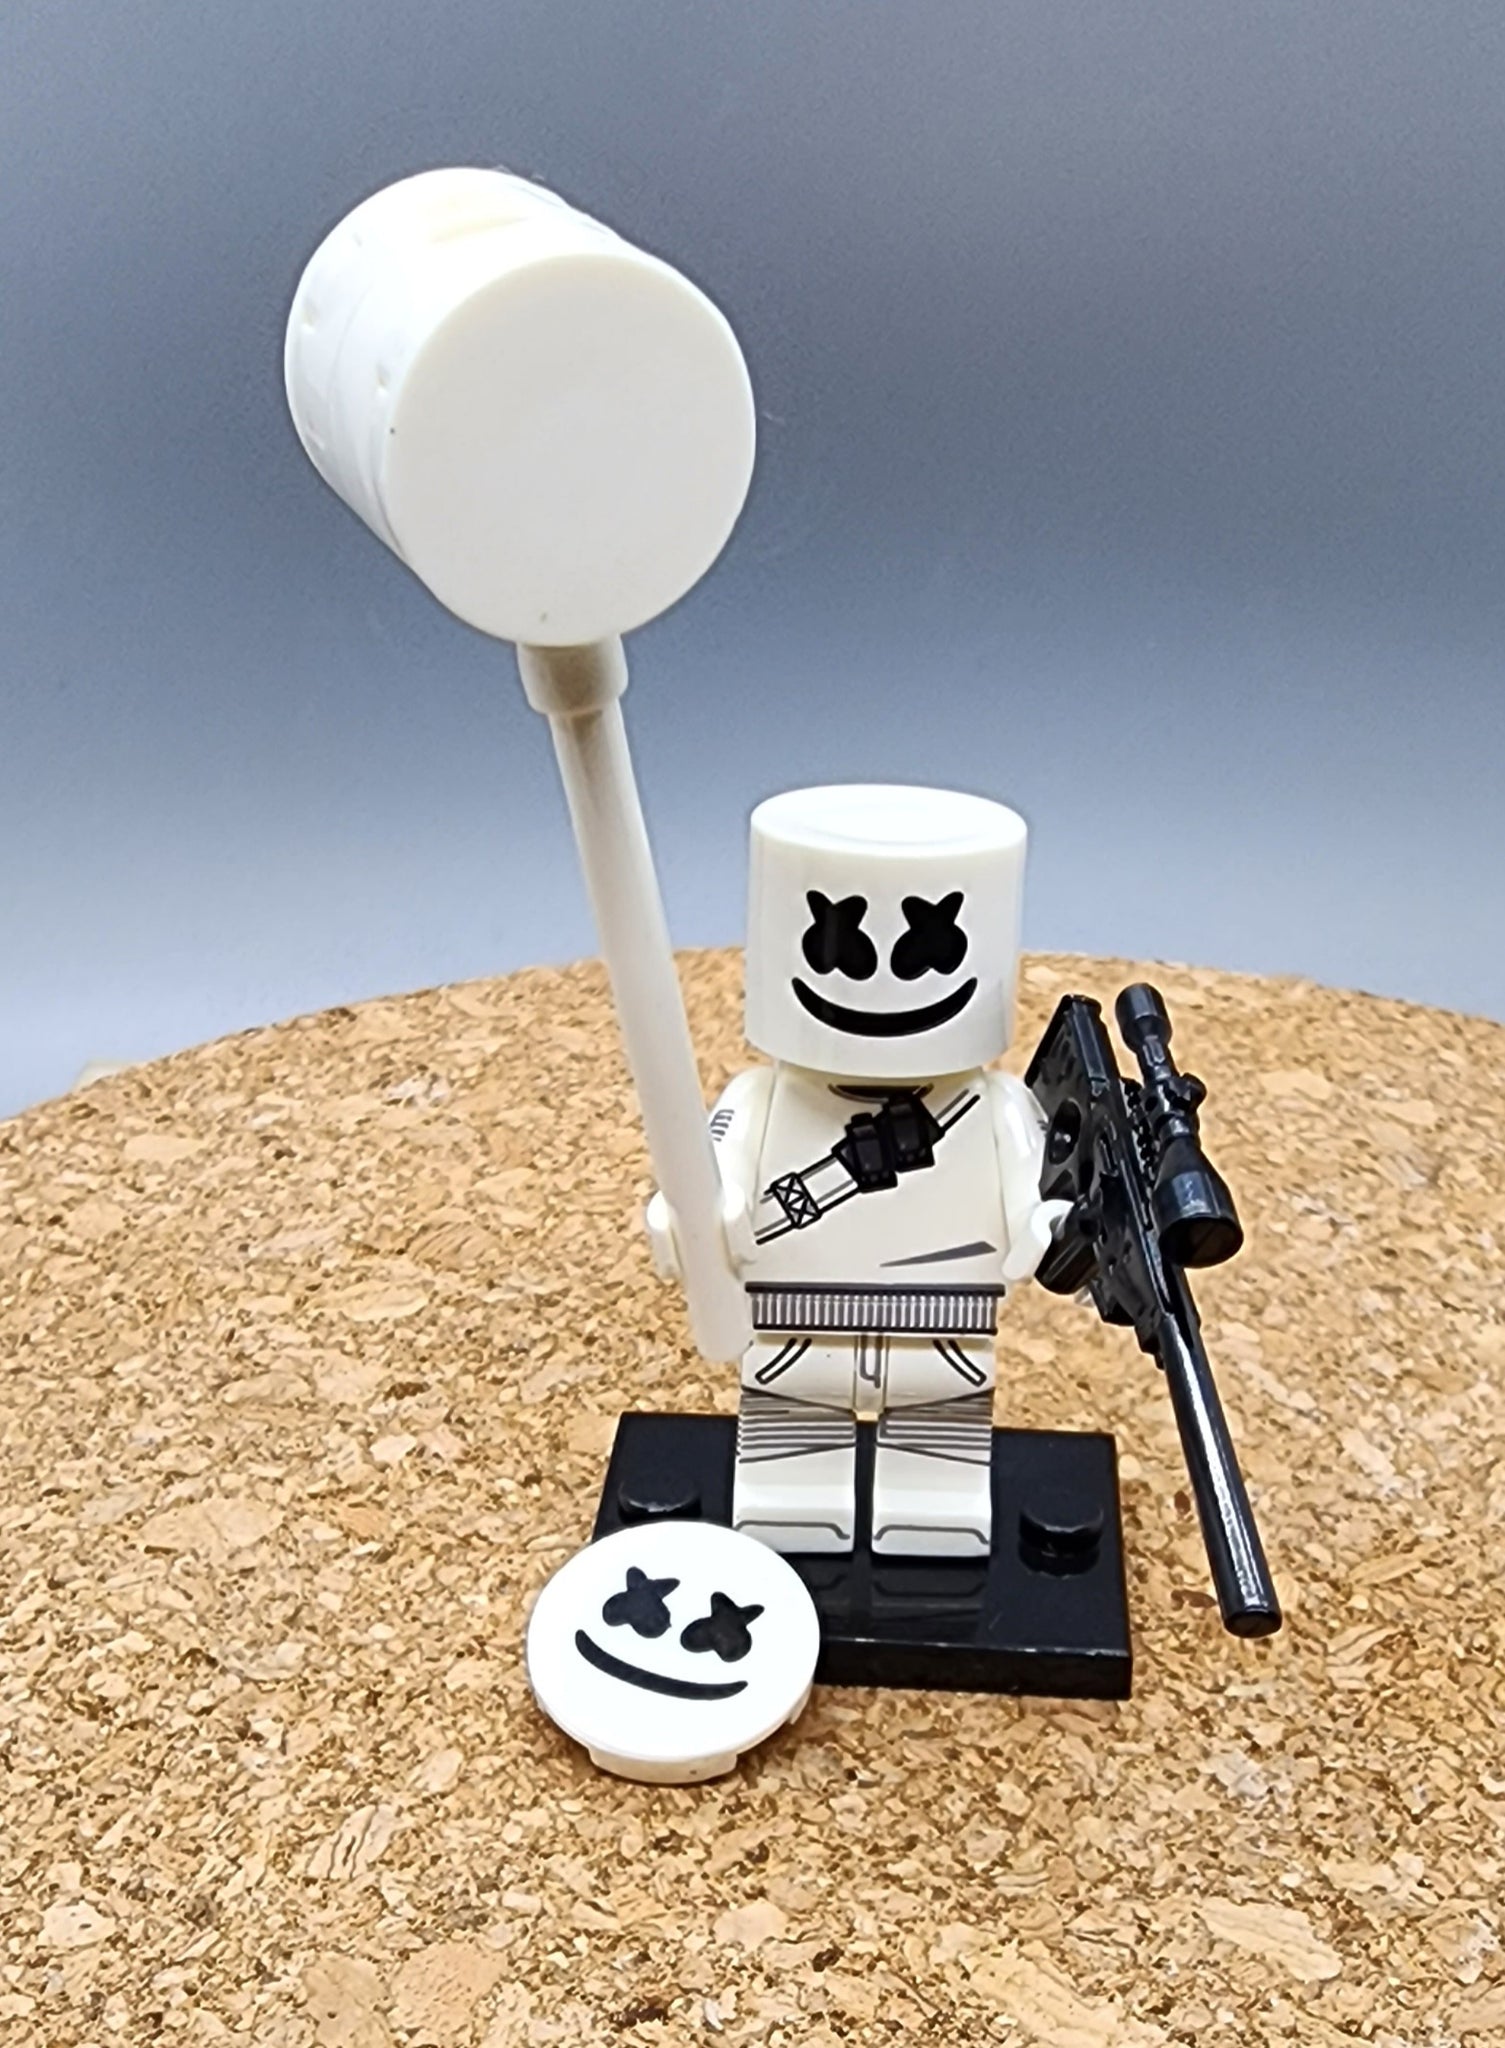 Marshmello Custom minifigure. Brand new in package. Please visit shop, lots more!